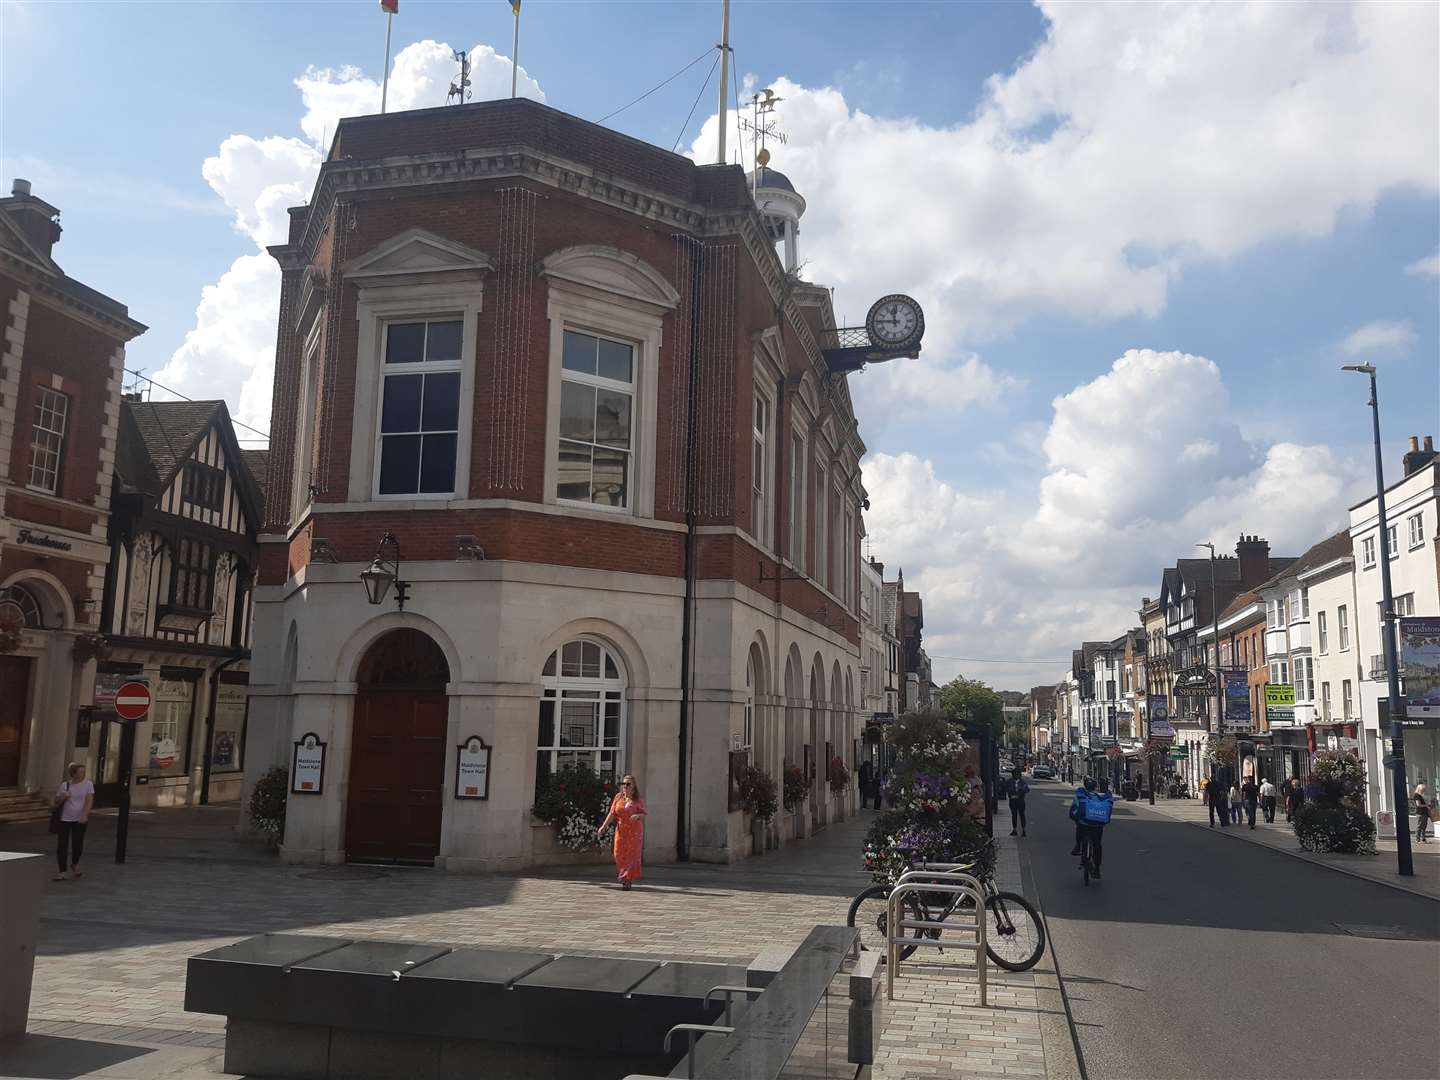 It will be all change at Maidstone Town Hall next year